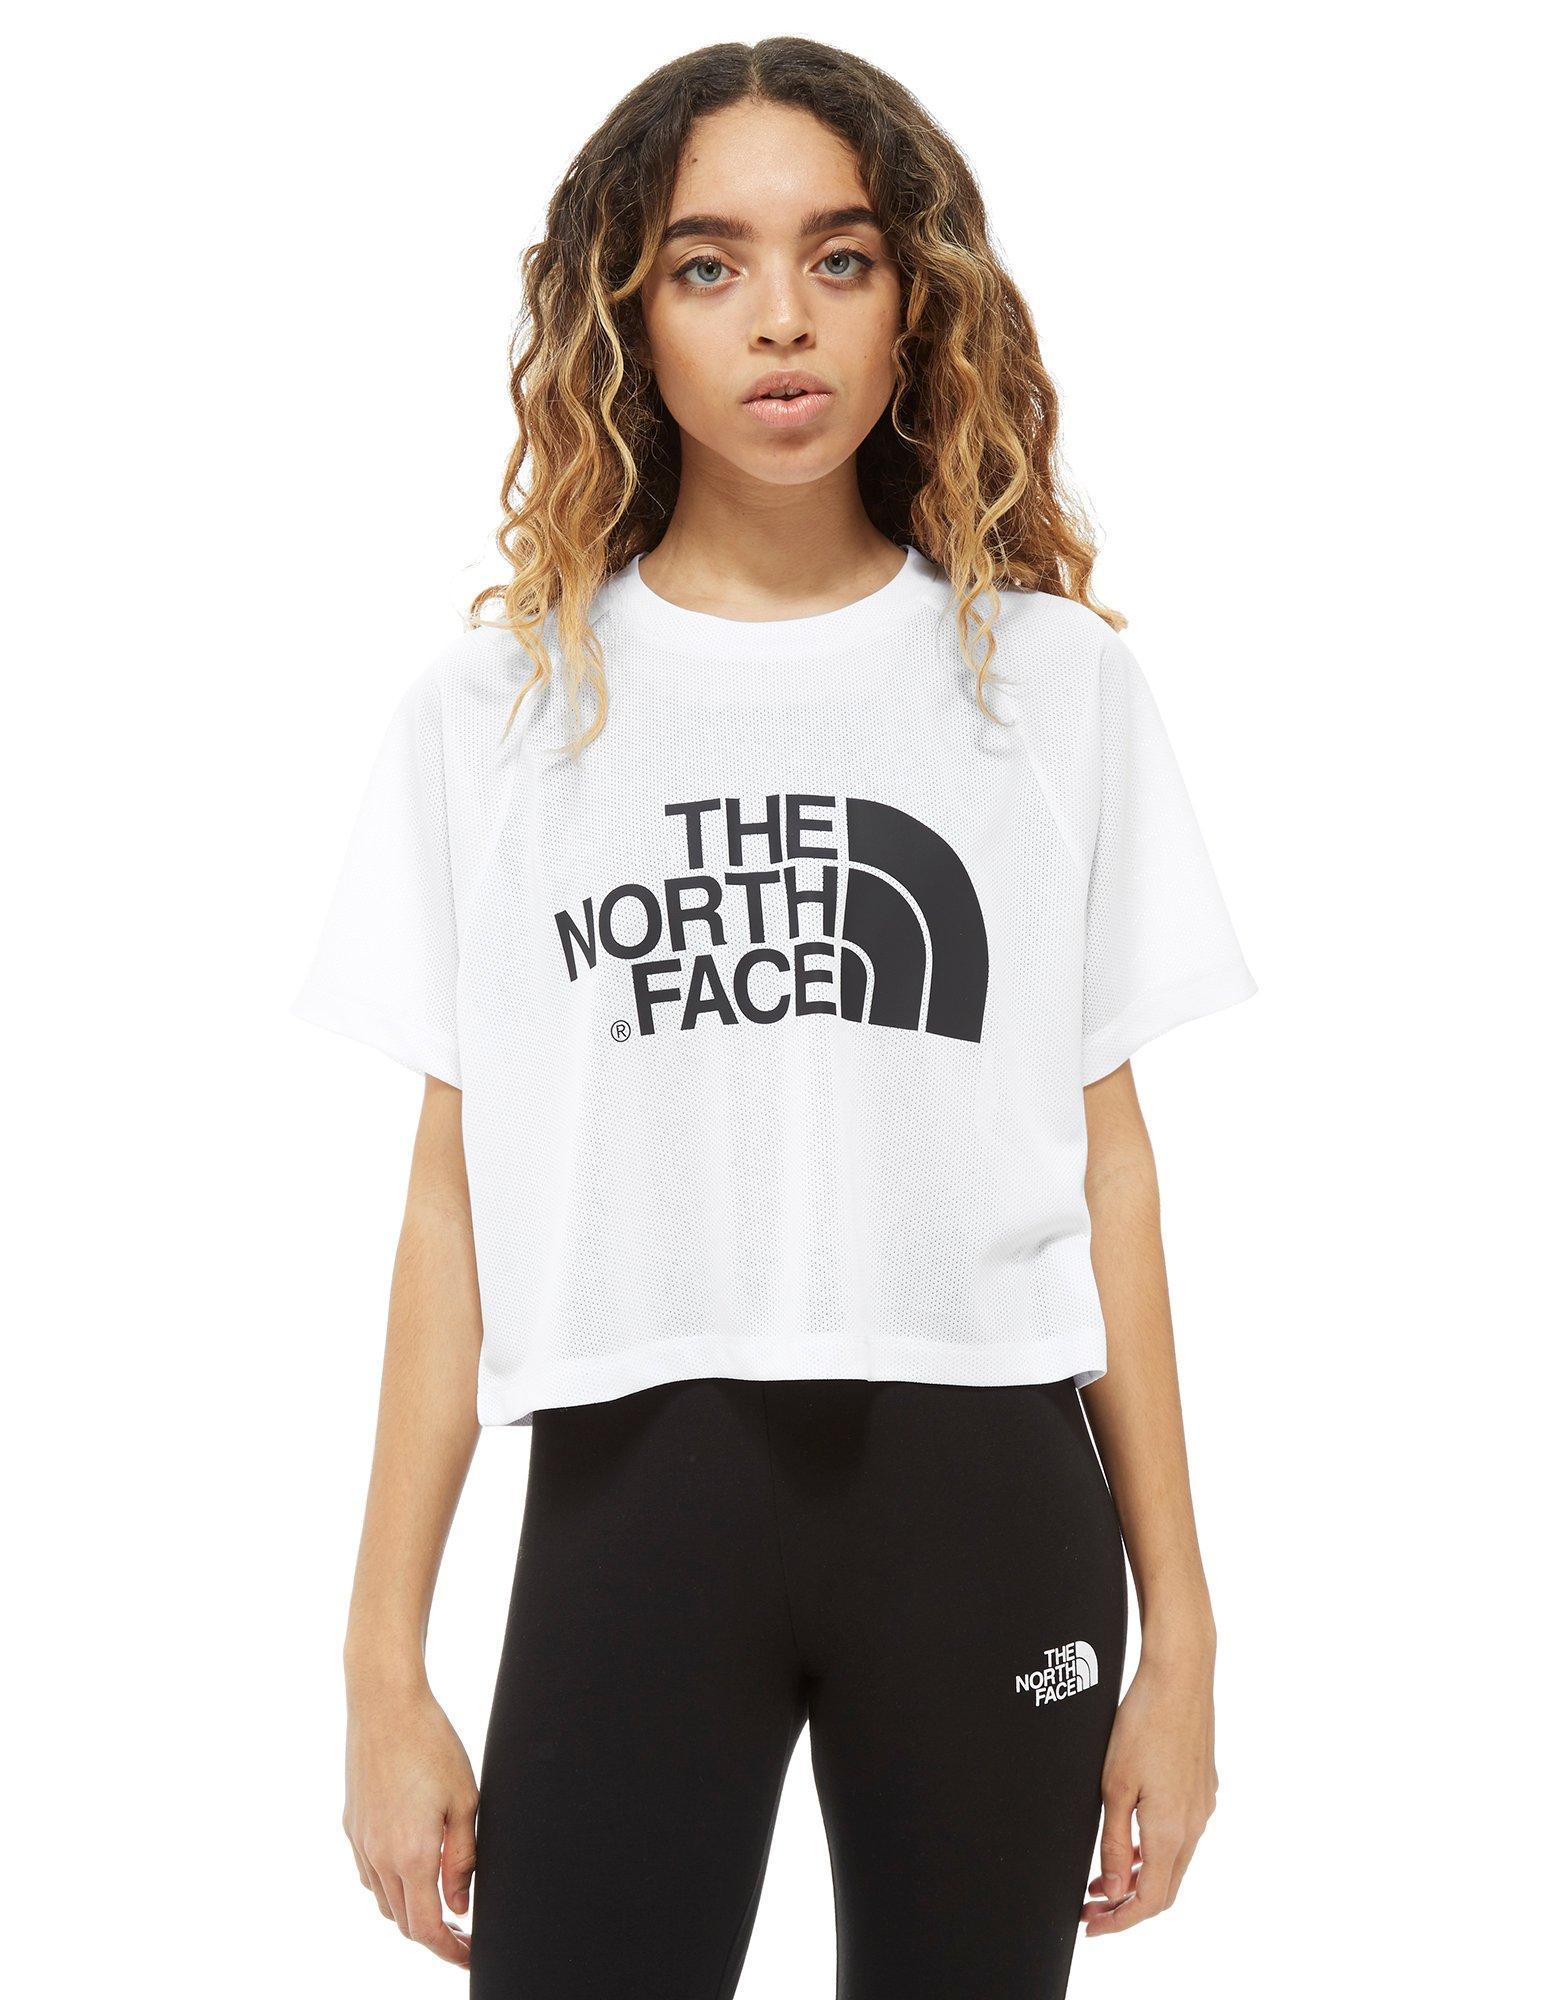 The North Face Crop Top Online, 59% OFF | www.ingeniovirtual.com